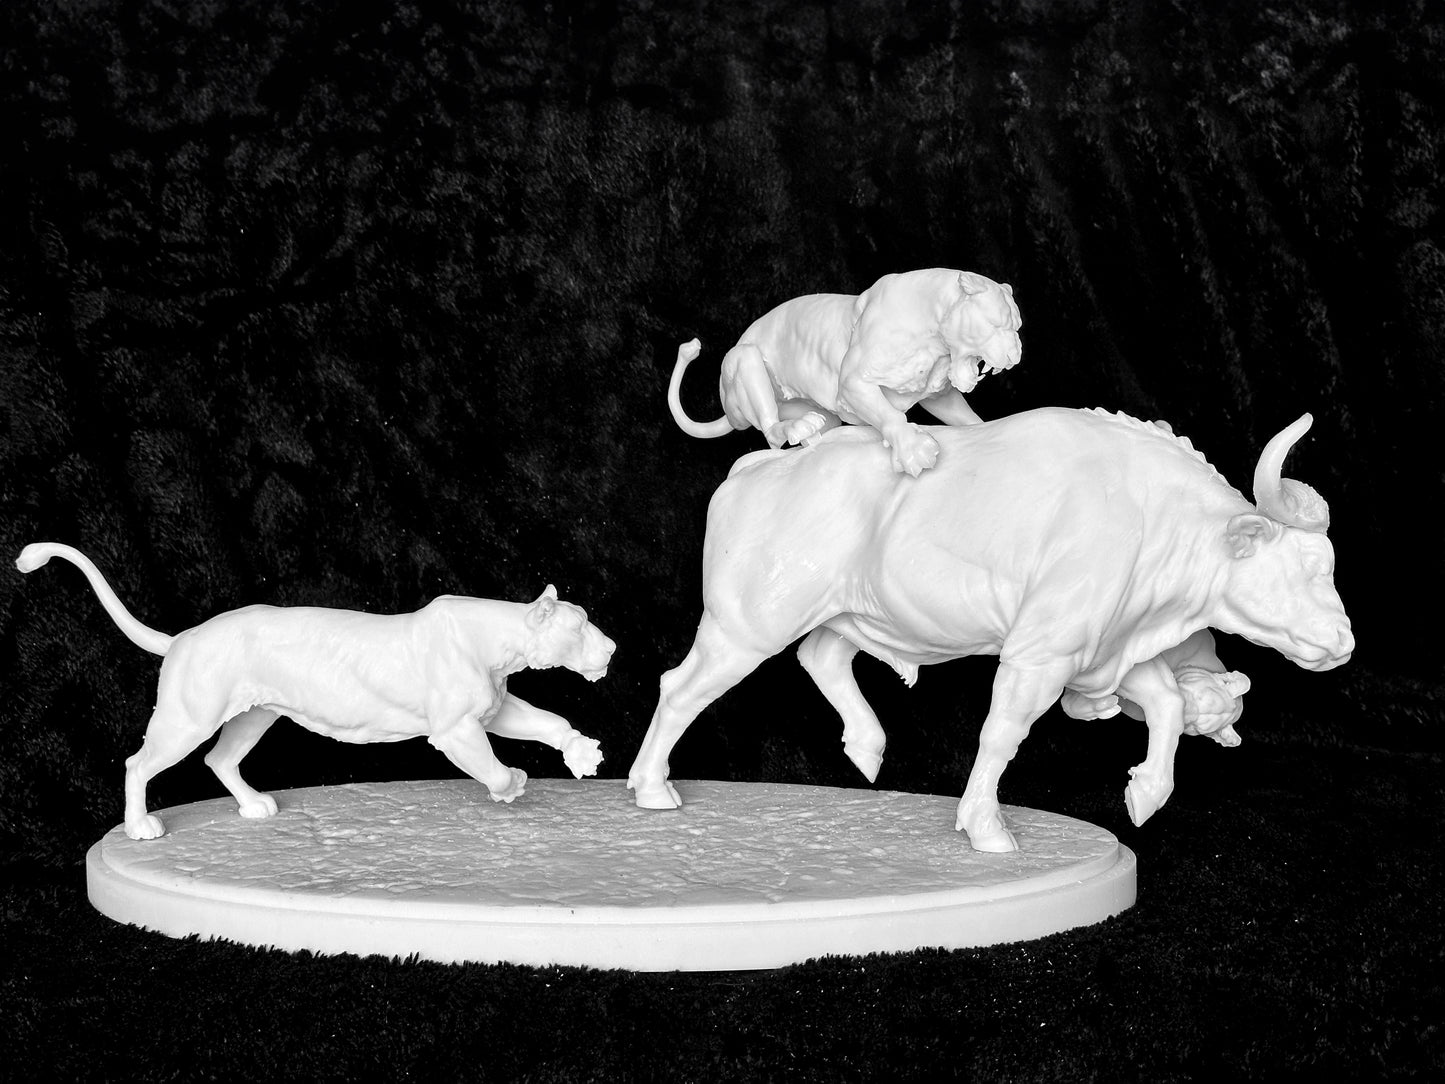 Lions hunting buffalo tradtional 1/9 scale piece ltd edition of 5